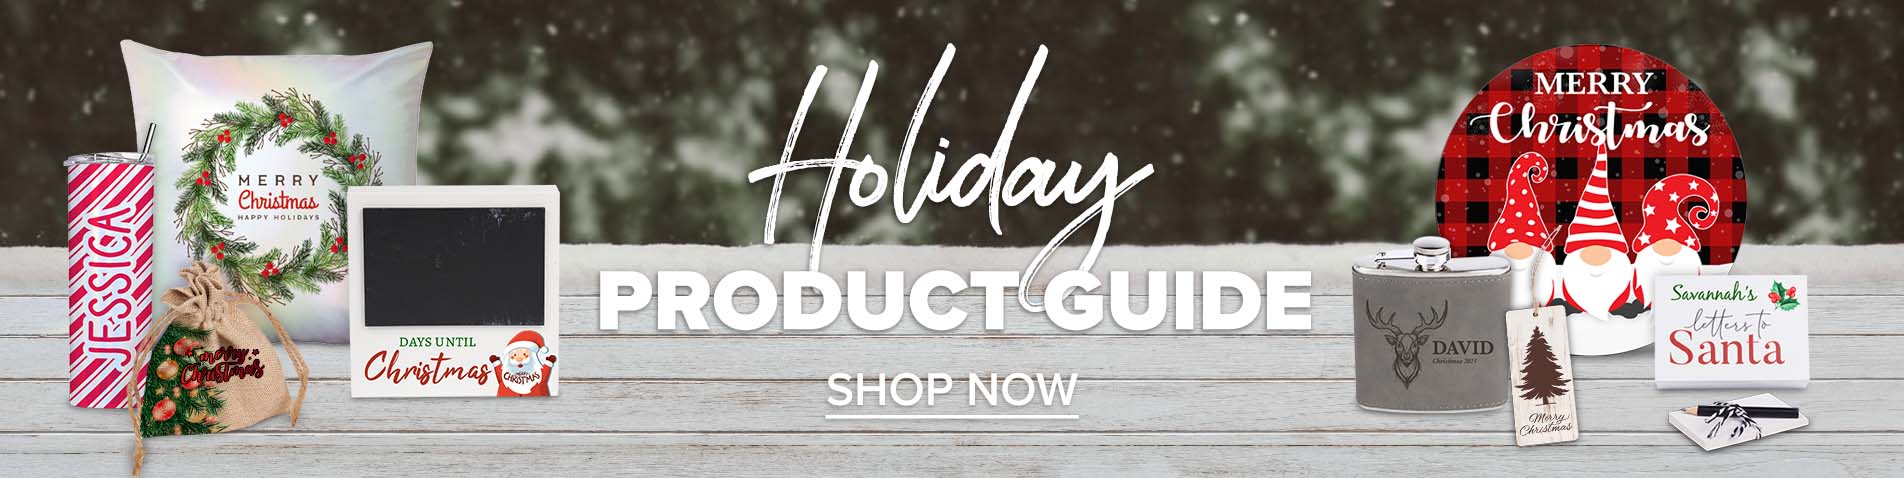 Holiday product guide banner with assortment of holiday themed customized items